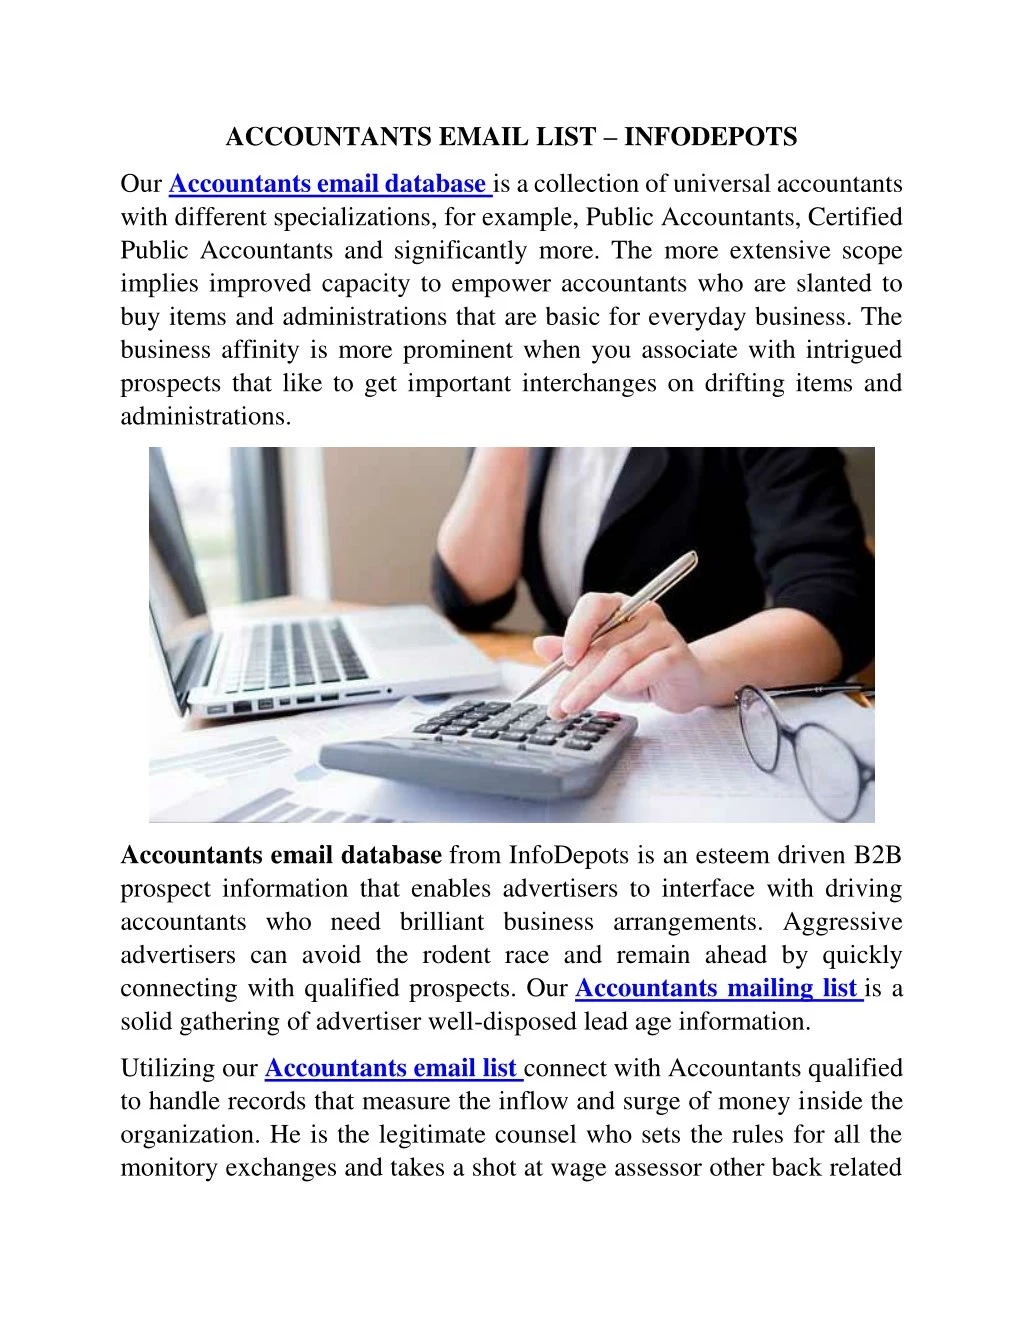 accountants email list infodepots